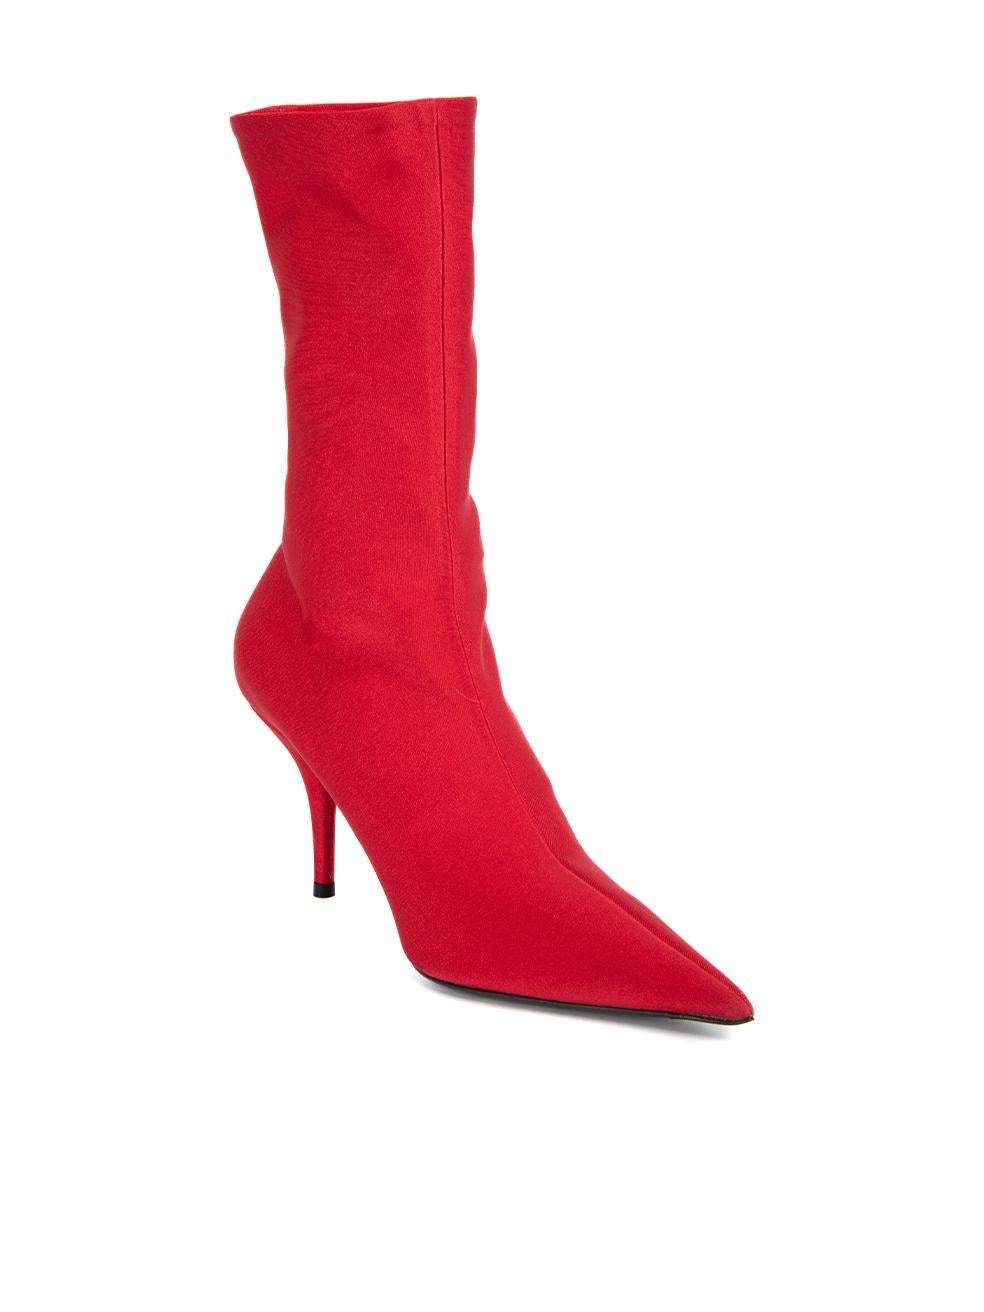 CONDITION is Never Worn. No visible wear to boots is evident on this used Balenciaga designer resale item. This item includes extra heel tips and the original dustbag. Details Red Jersey Mid calf sock boots Pointed toe High heel Slip prevent on